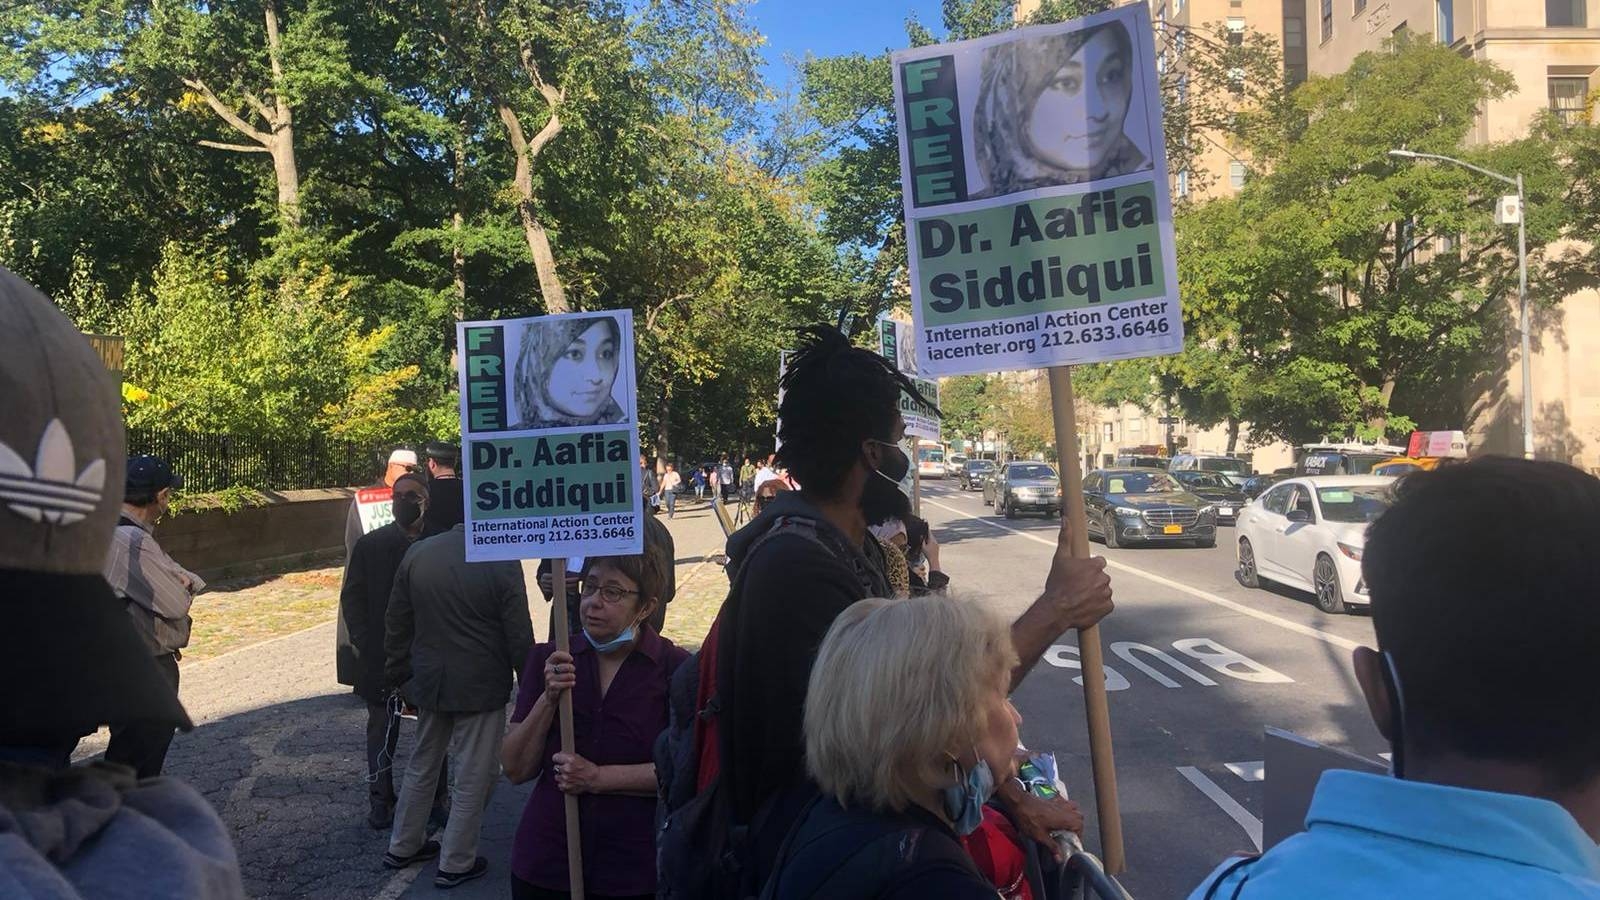 Protesters rally outside the Pakistani consulate in New York City, holding signs reading "Free Dr Aafia Siddiqui".